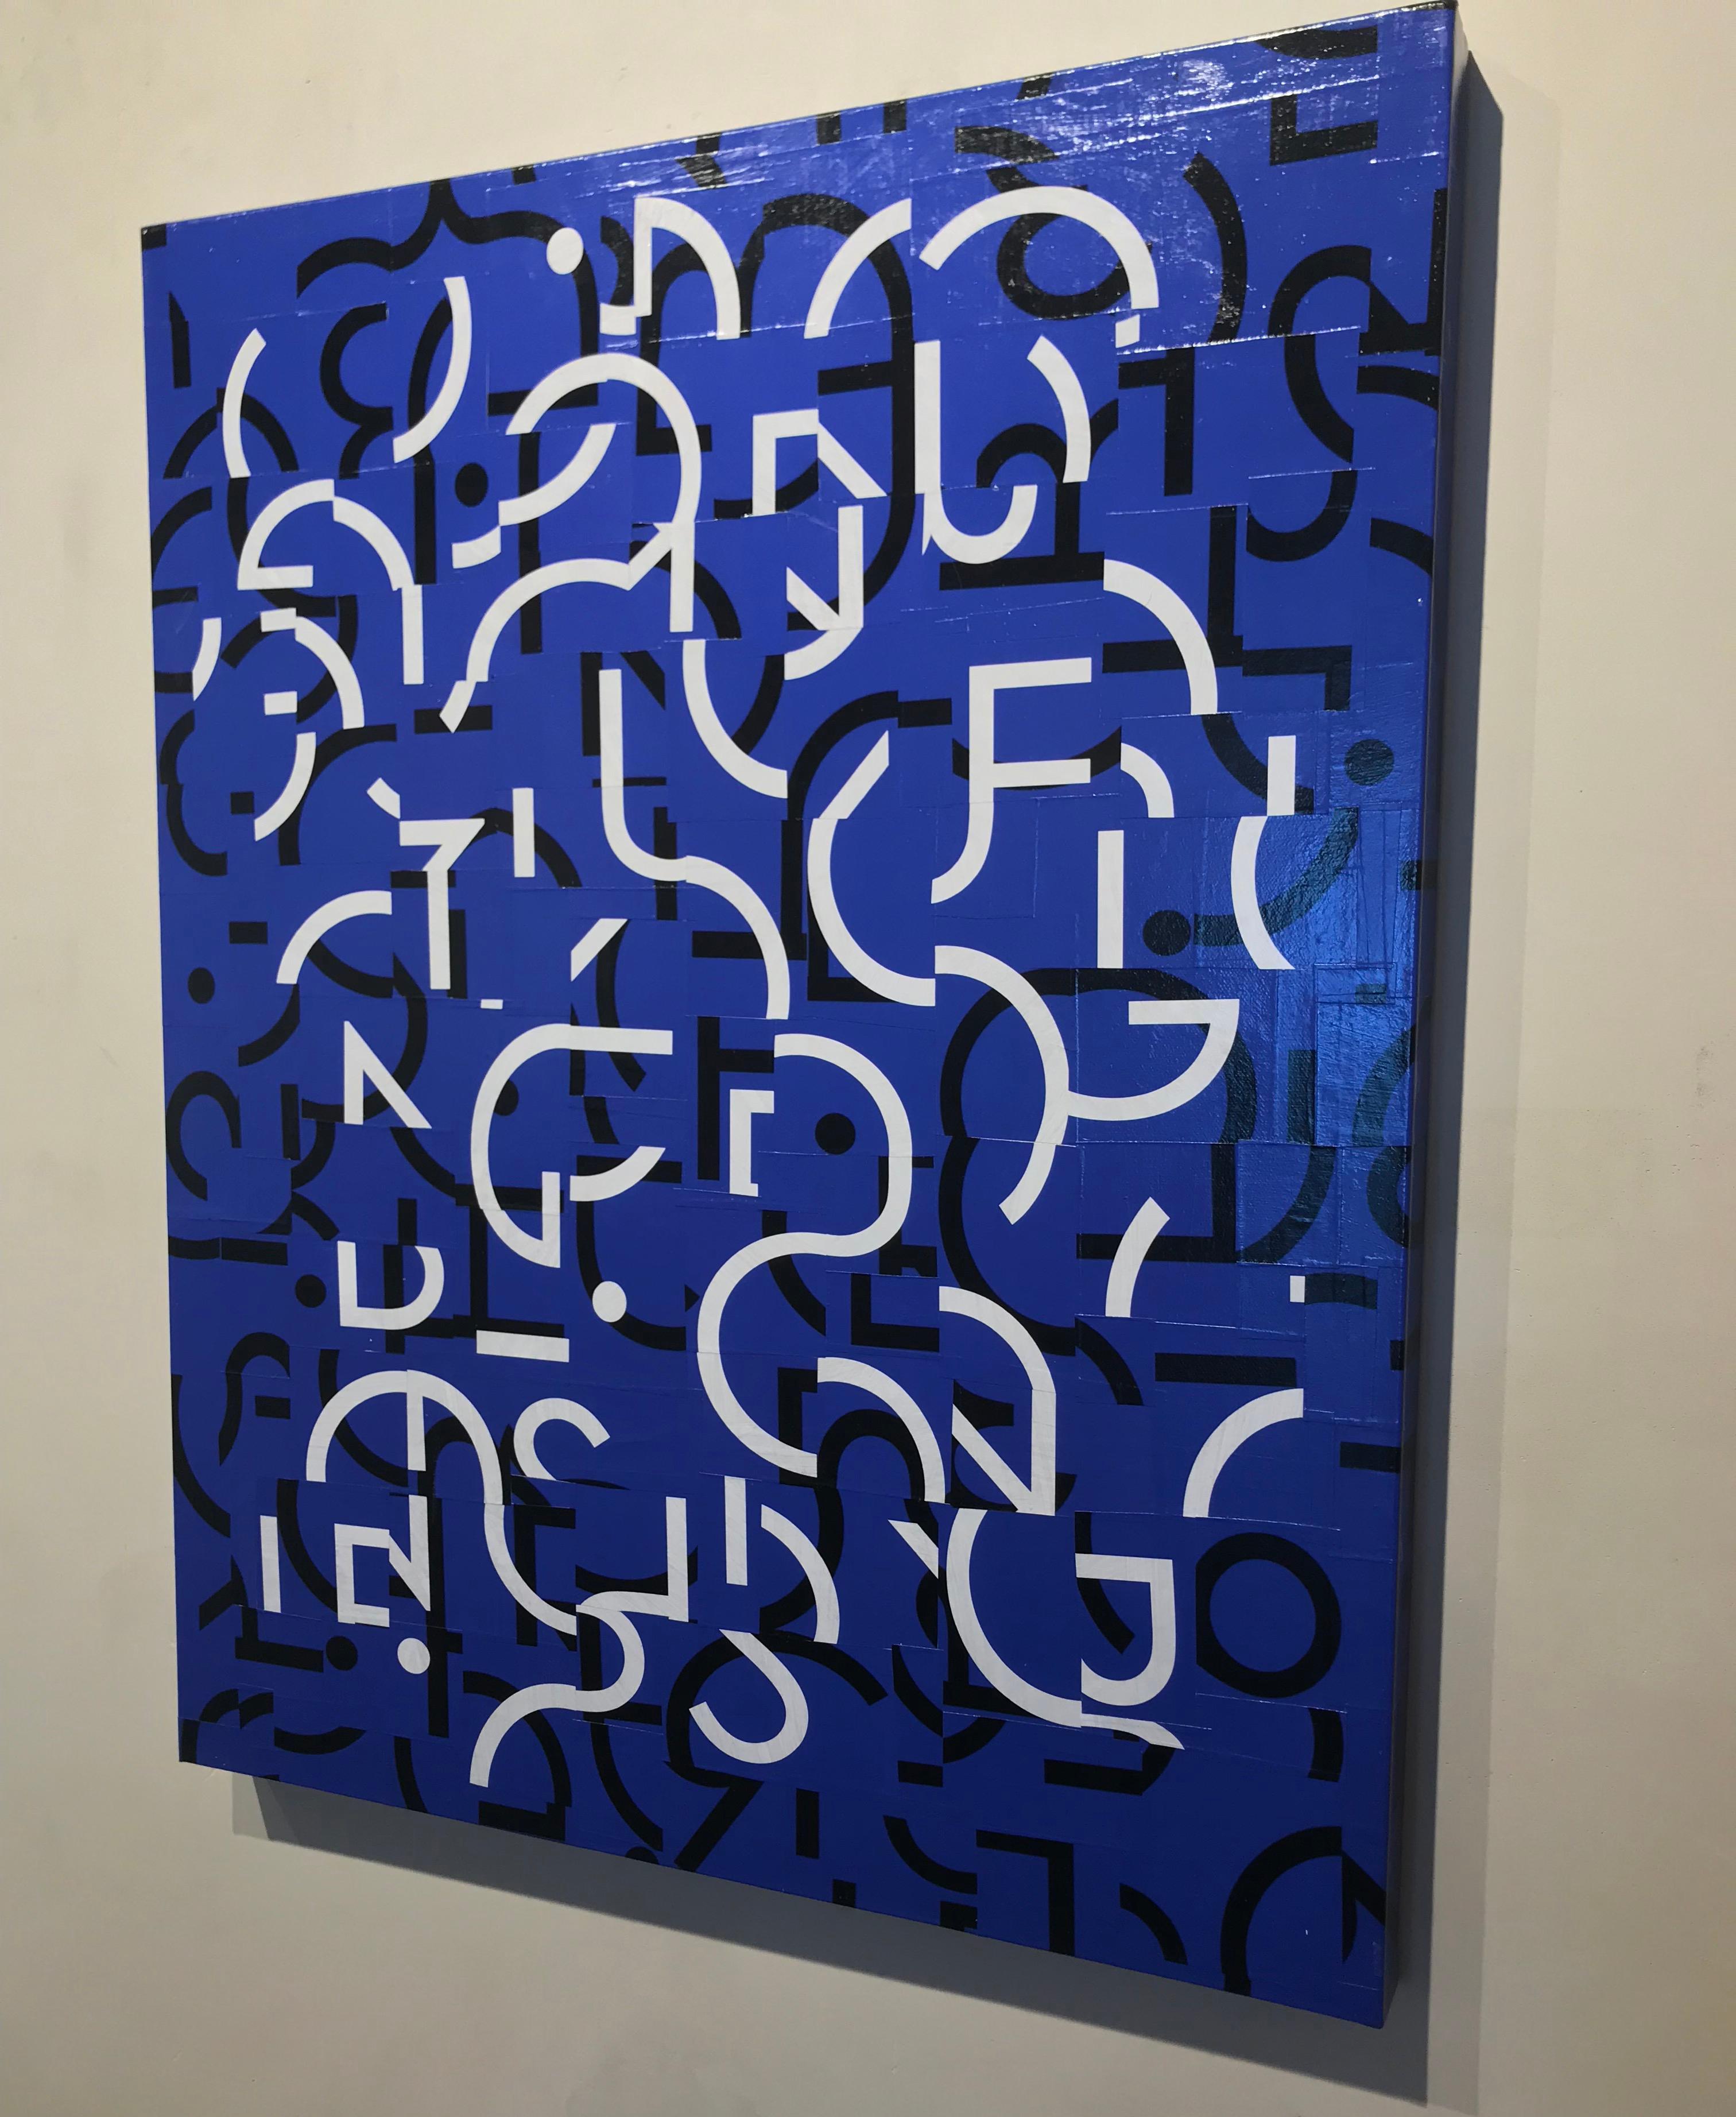 Blue, white, and black abstract geometric collage on canvas by Cecil Touchon. 
Cecil Touchon’s paintings, which he considers deconstructed poetry, stem from his interest in the modernist history of abstract art and his belief that language and